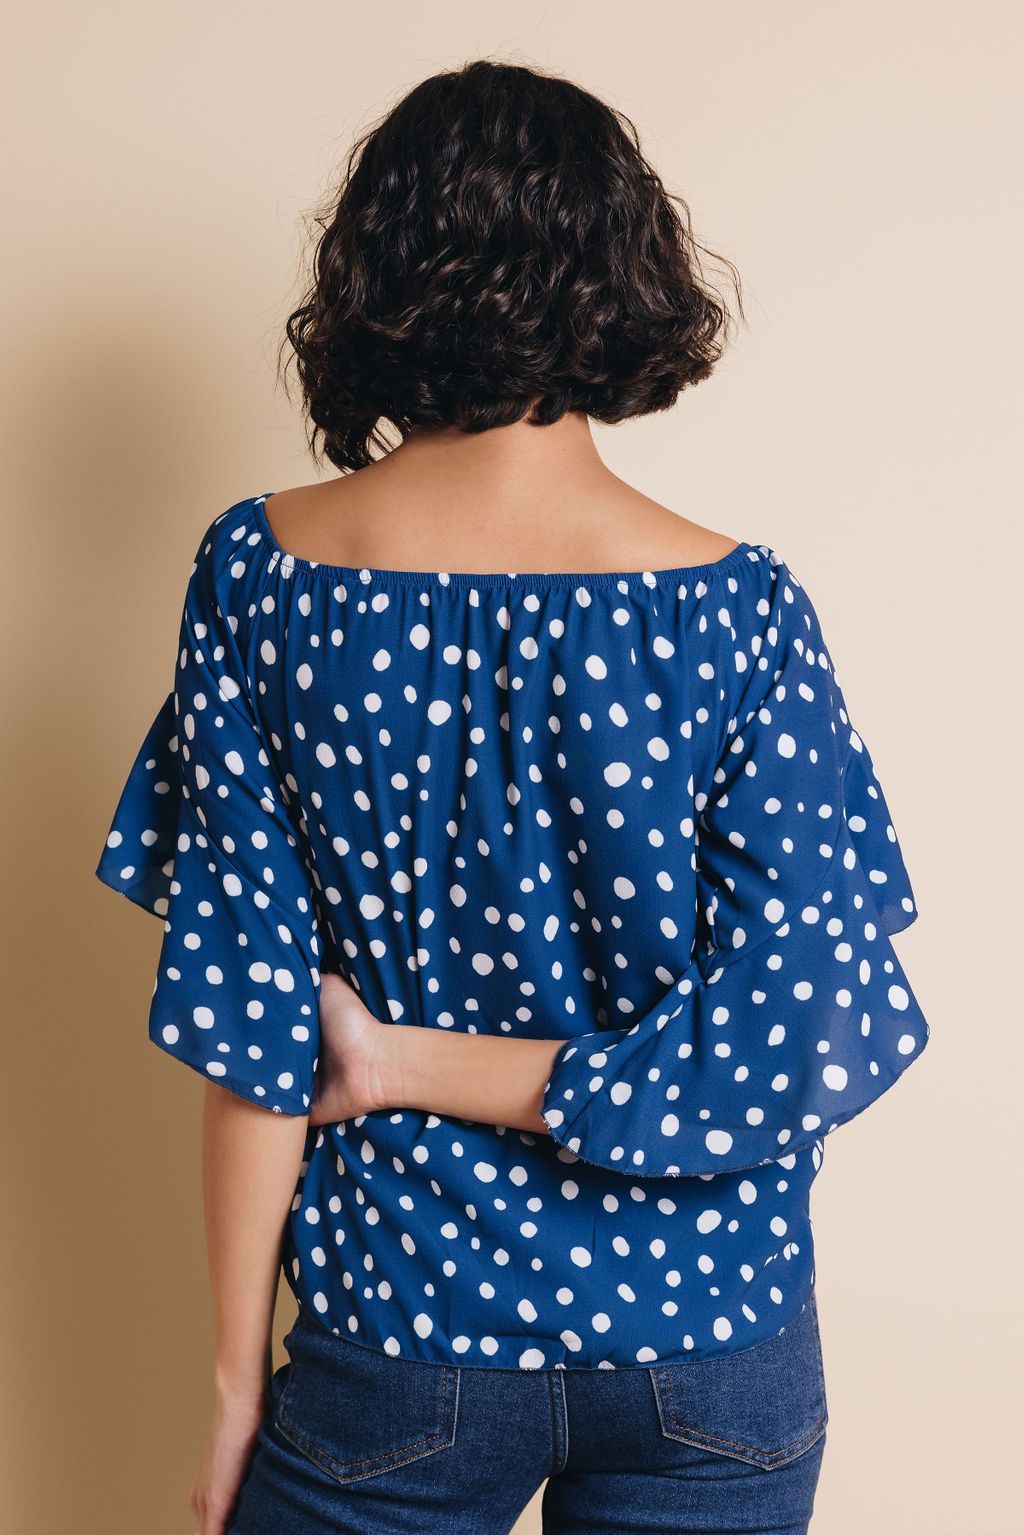 Home Bound Polka Dot Top Stay Warm In Style